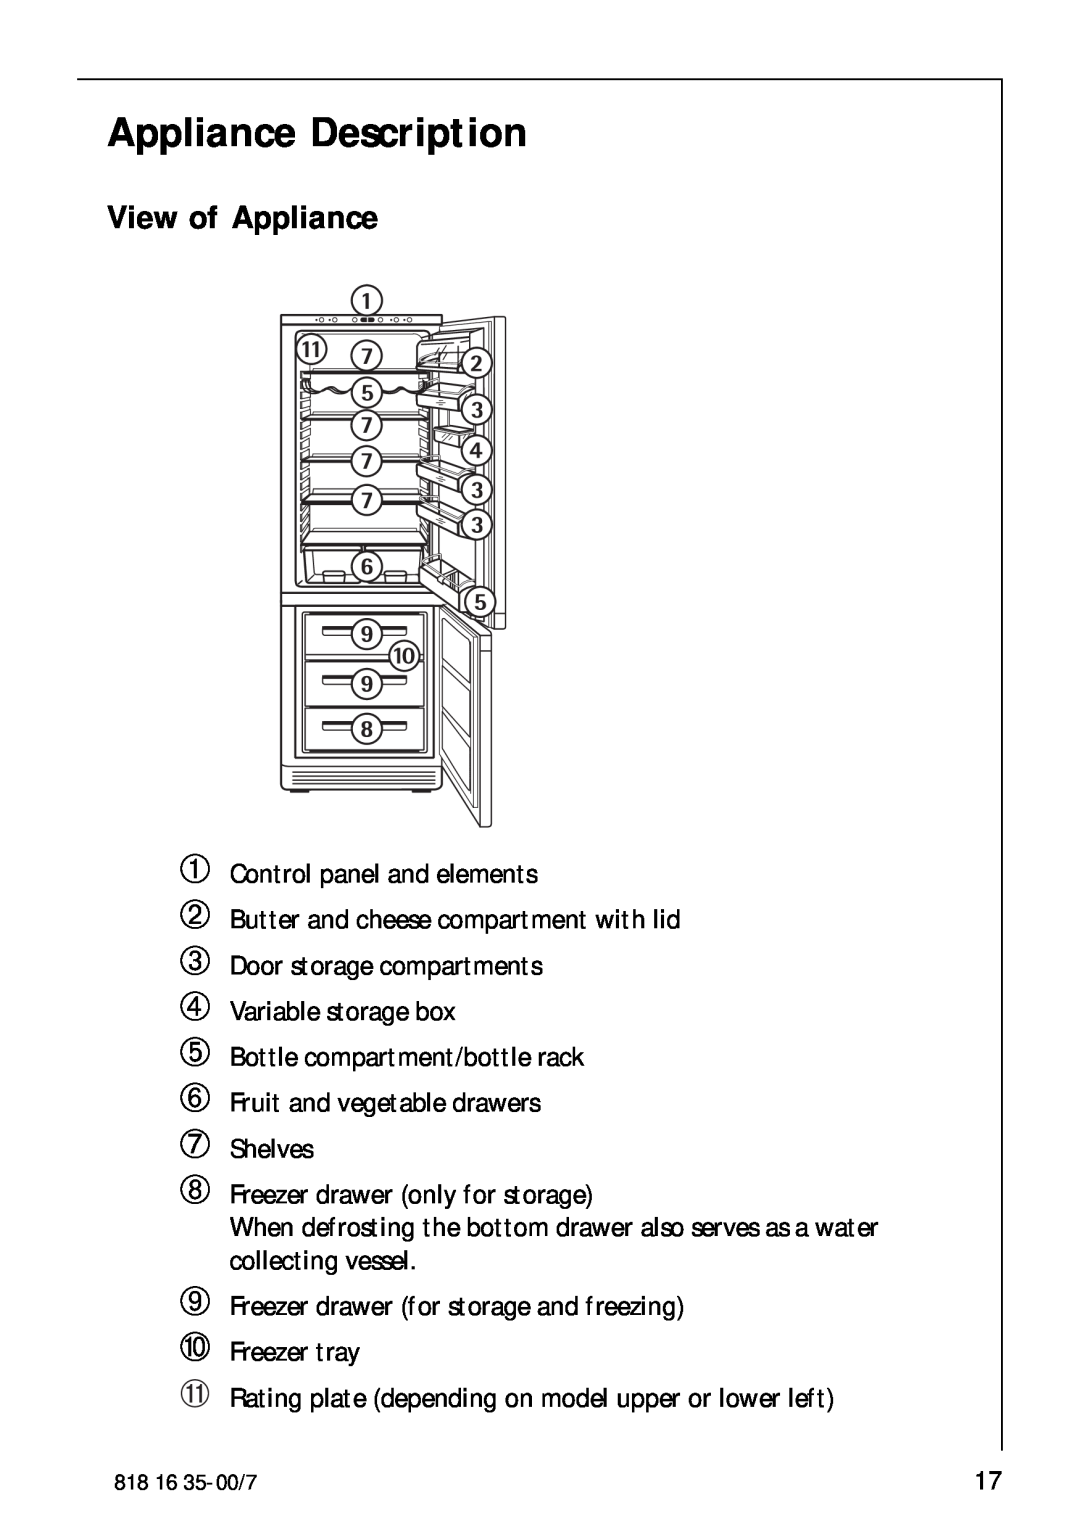 Electrolux KO_SANTO 4085 operating instructions Appliance Description, View of Appliance 